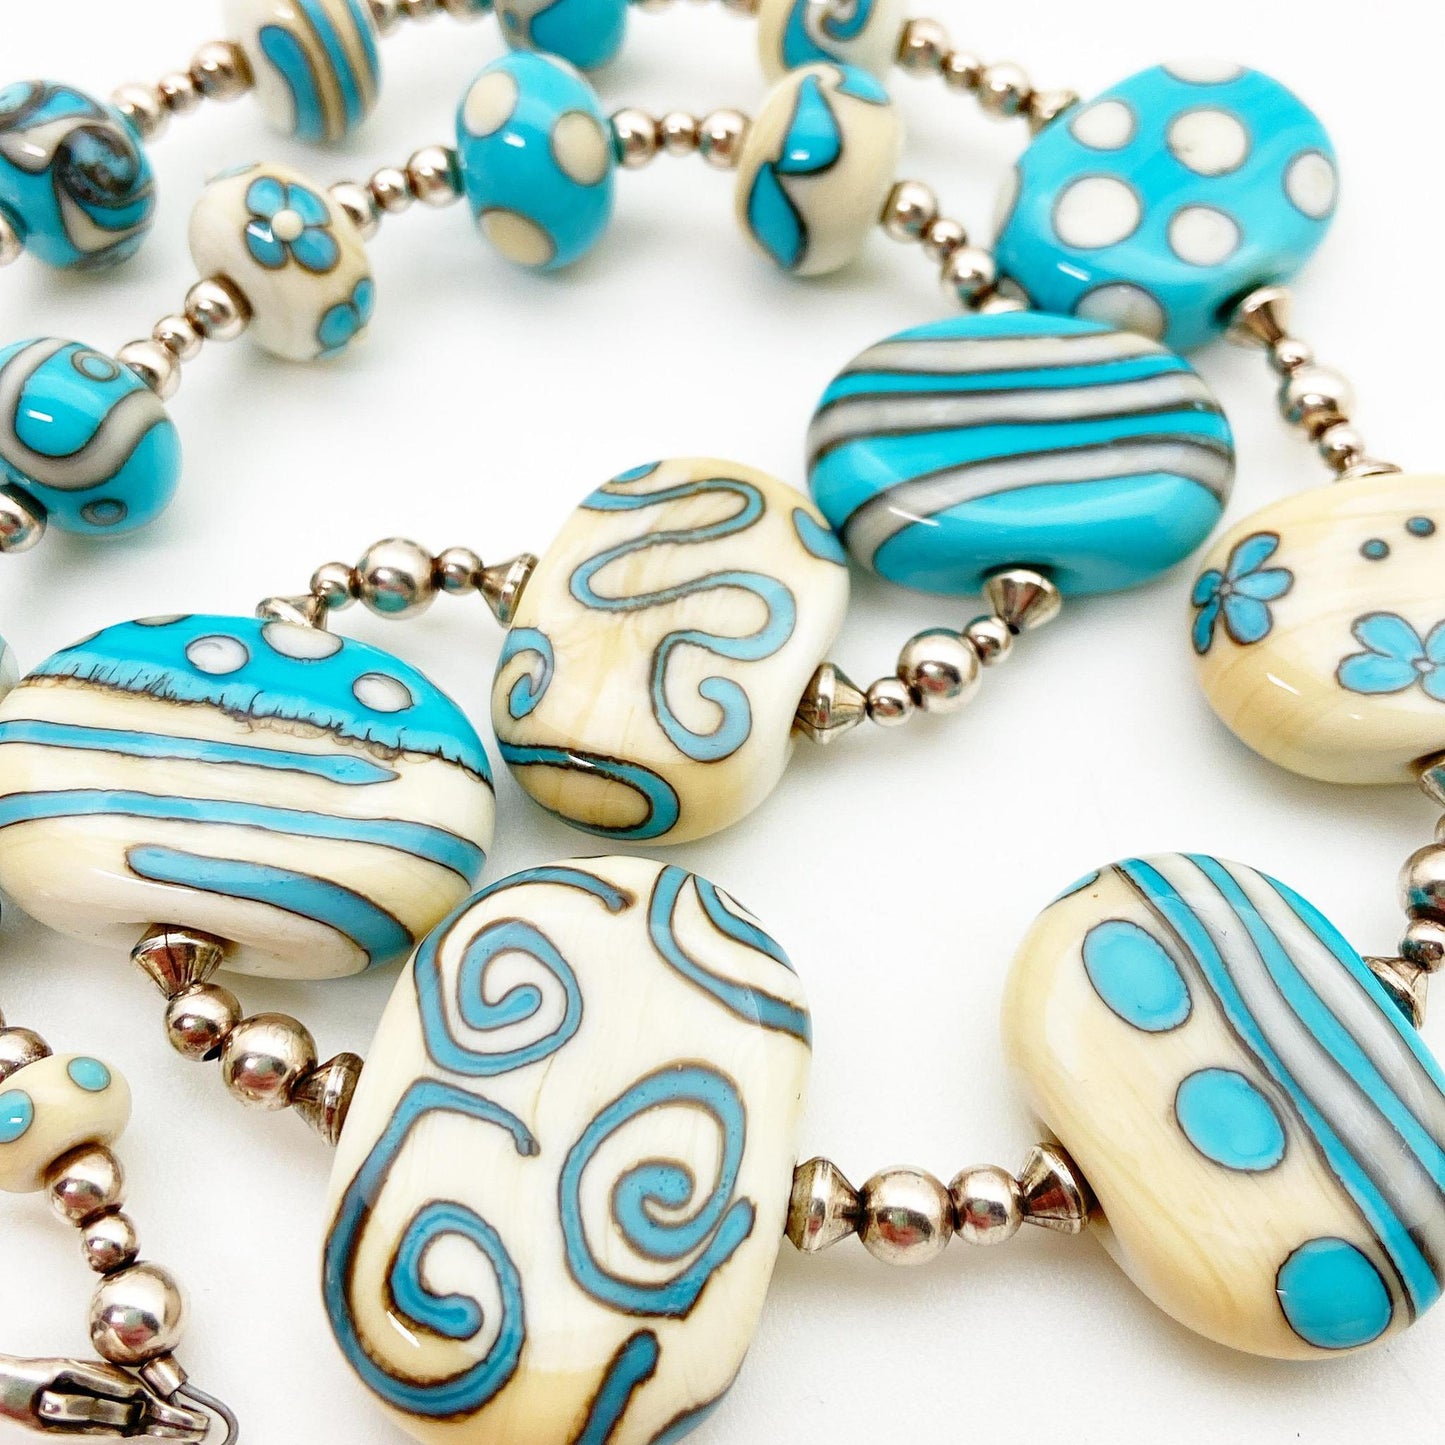 Necklace - Turquoise & White - Original Glass Beads